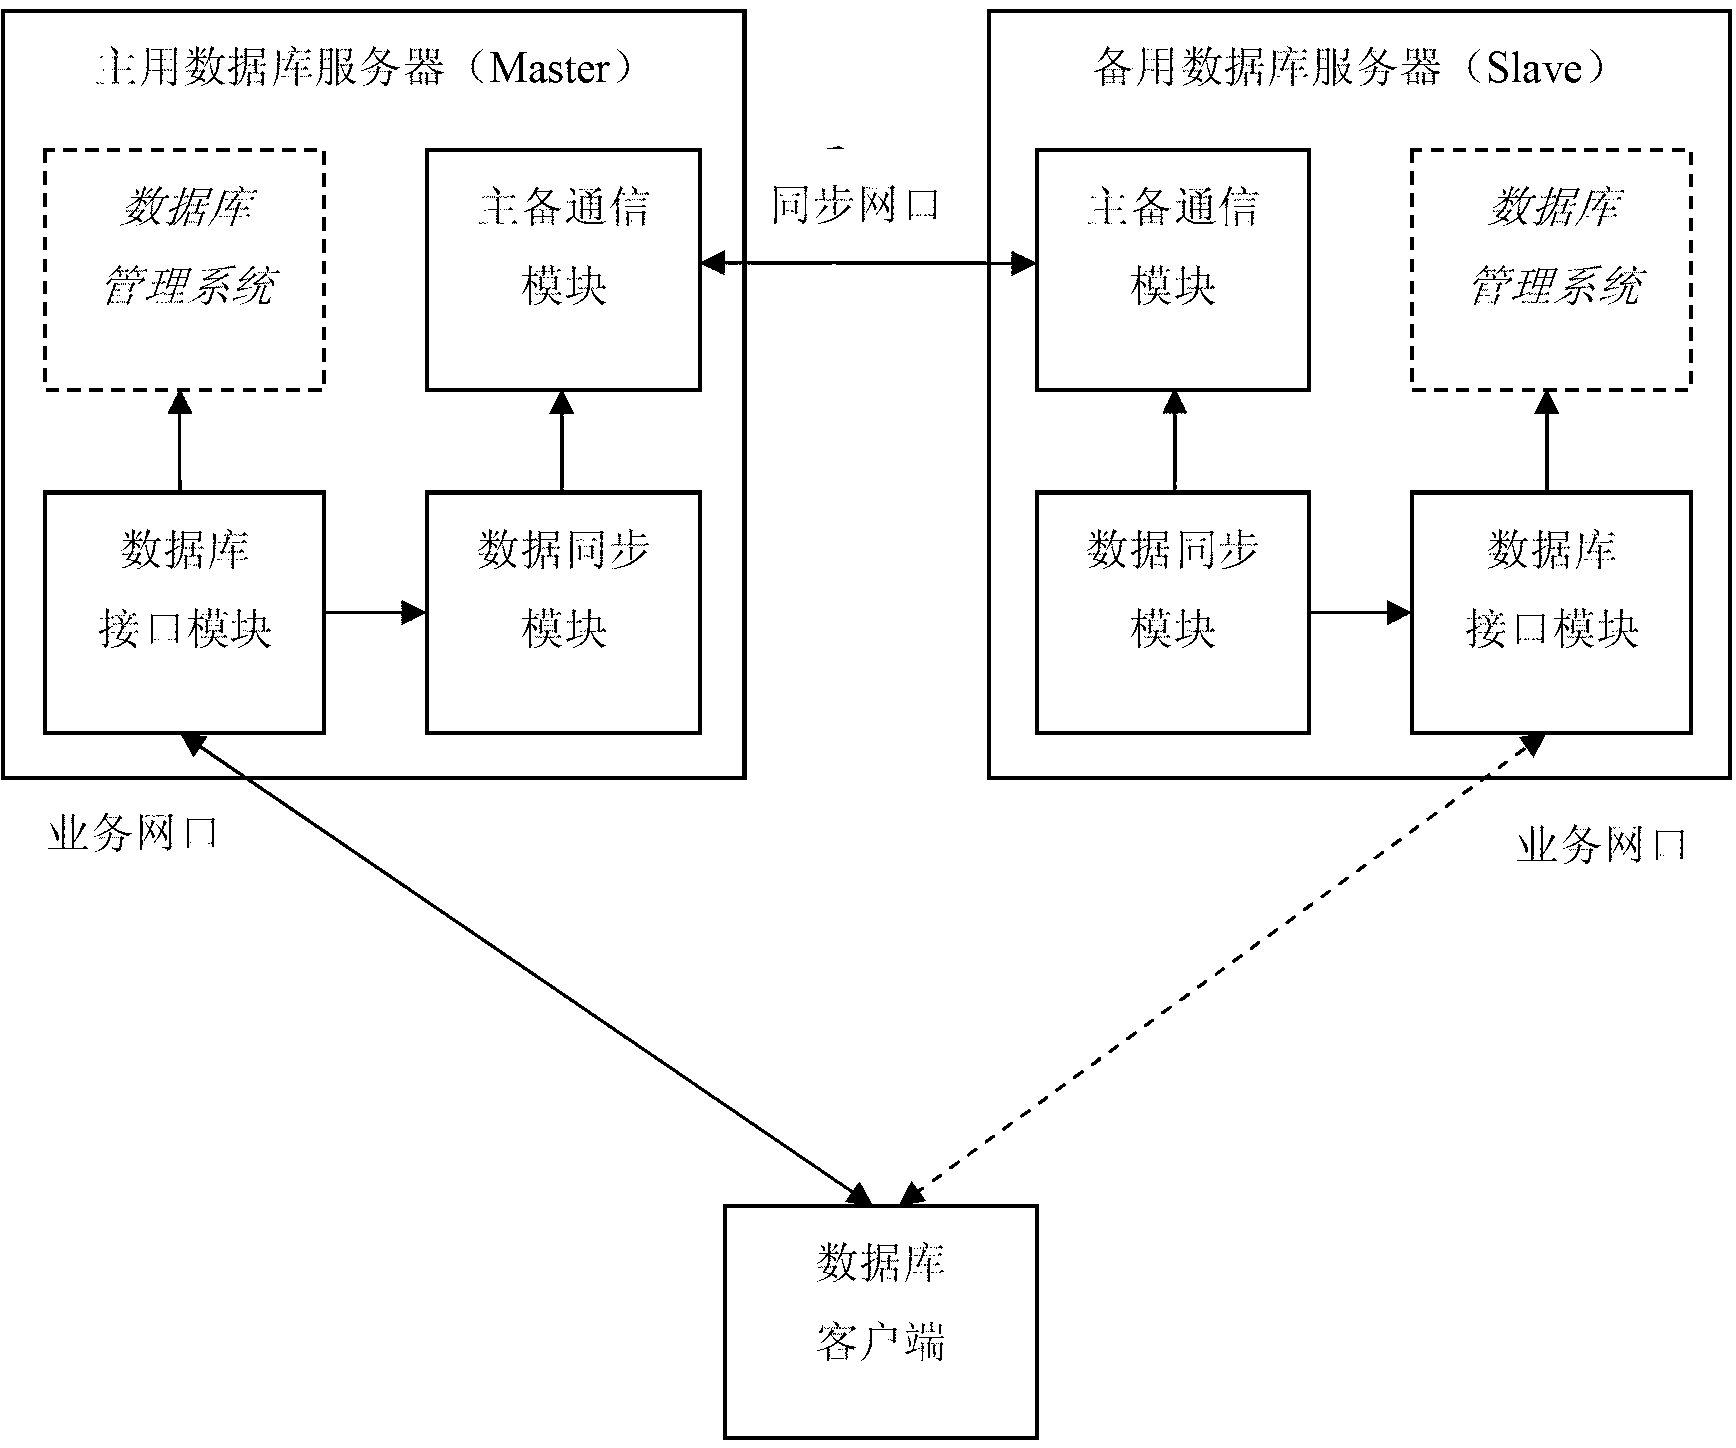 Method for hot standby of dual database servers